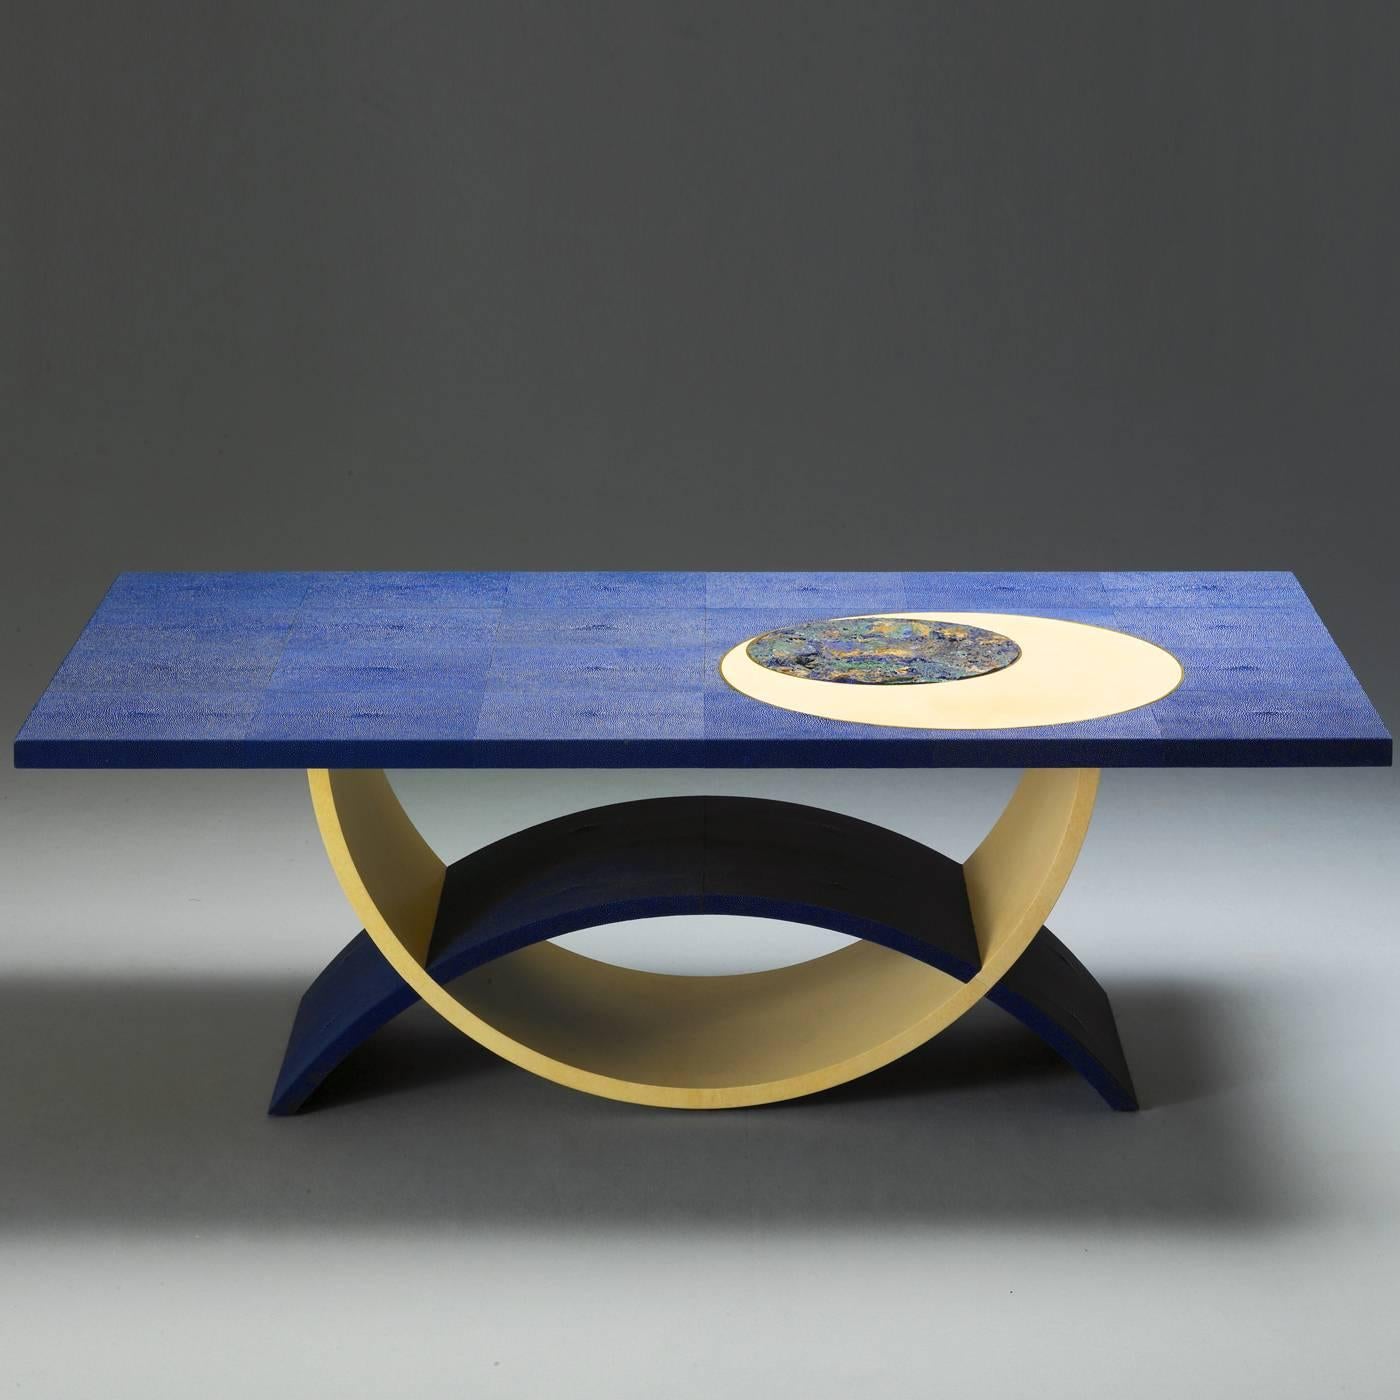 This striking living room table features a top upholstered in blue shagreen (with its distinctive rough texture). The top is embellished with a round insert in azurite stone within a larger round in parchment whose outer profile is highlighted with